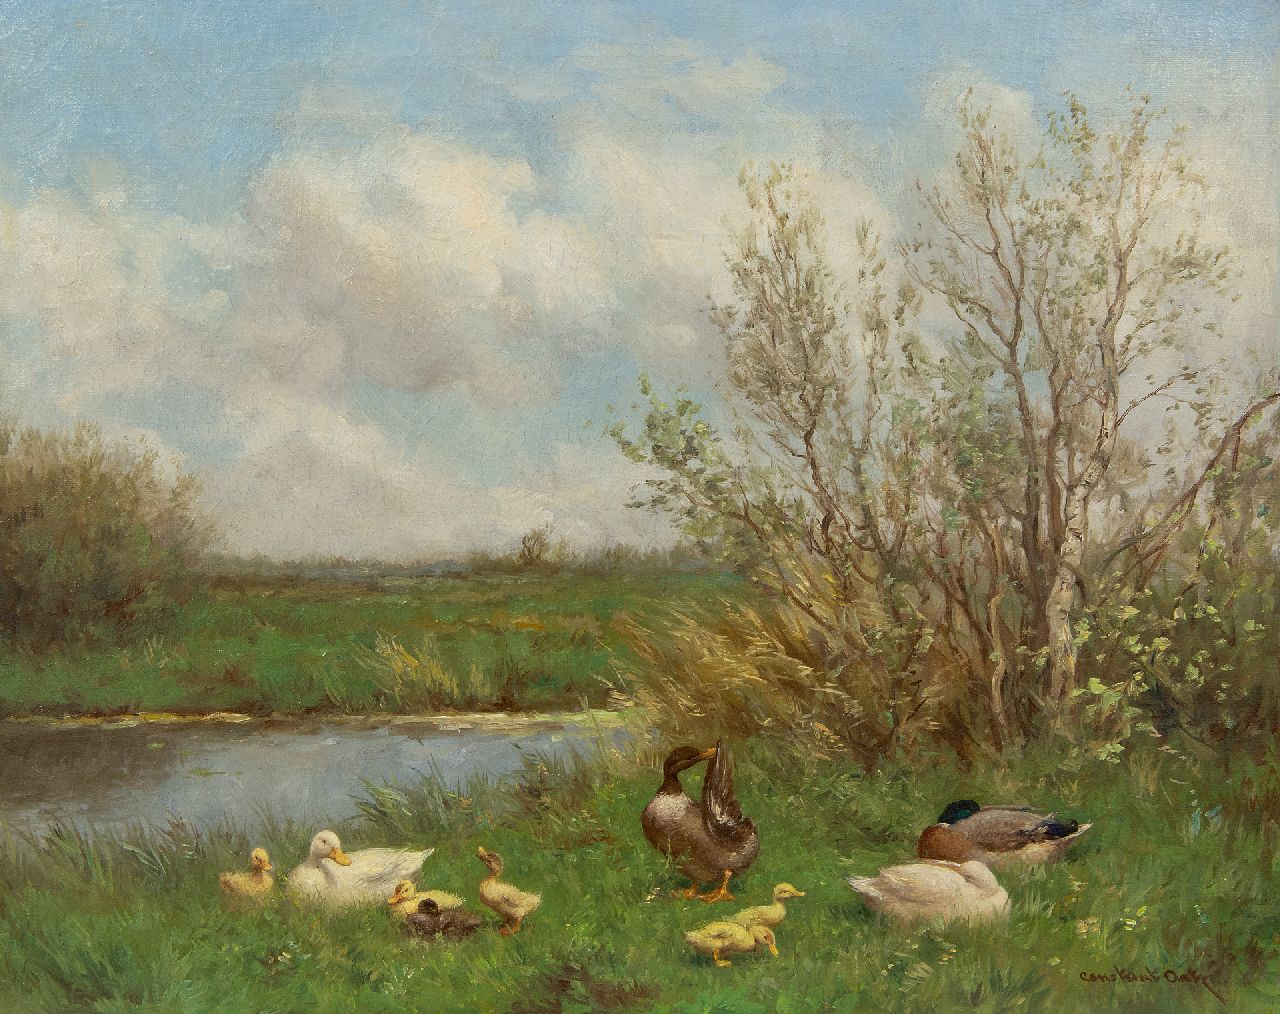 Artz C.D.L.  | 'Constant' David Ludovic Artz | Paintings offered for sale | Ducks along the waterside, oil on canvas 40.5 x 50.4 cm, signed l.r.